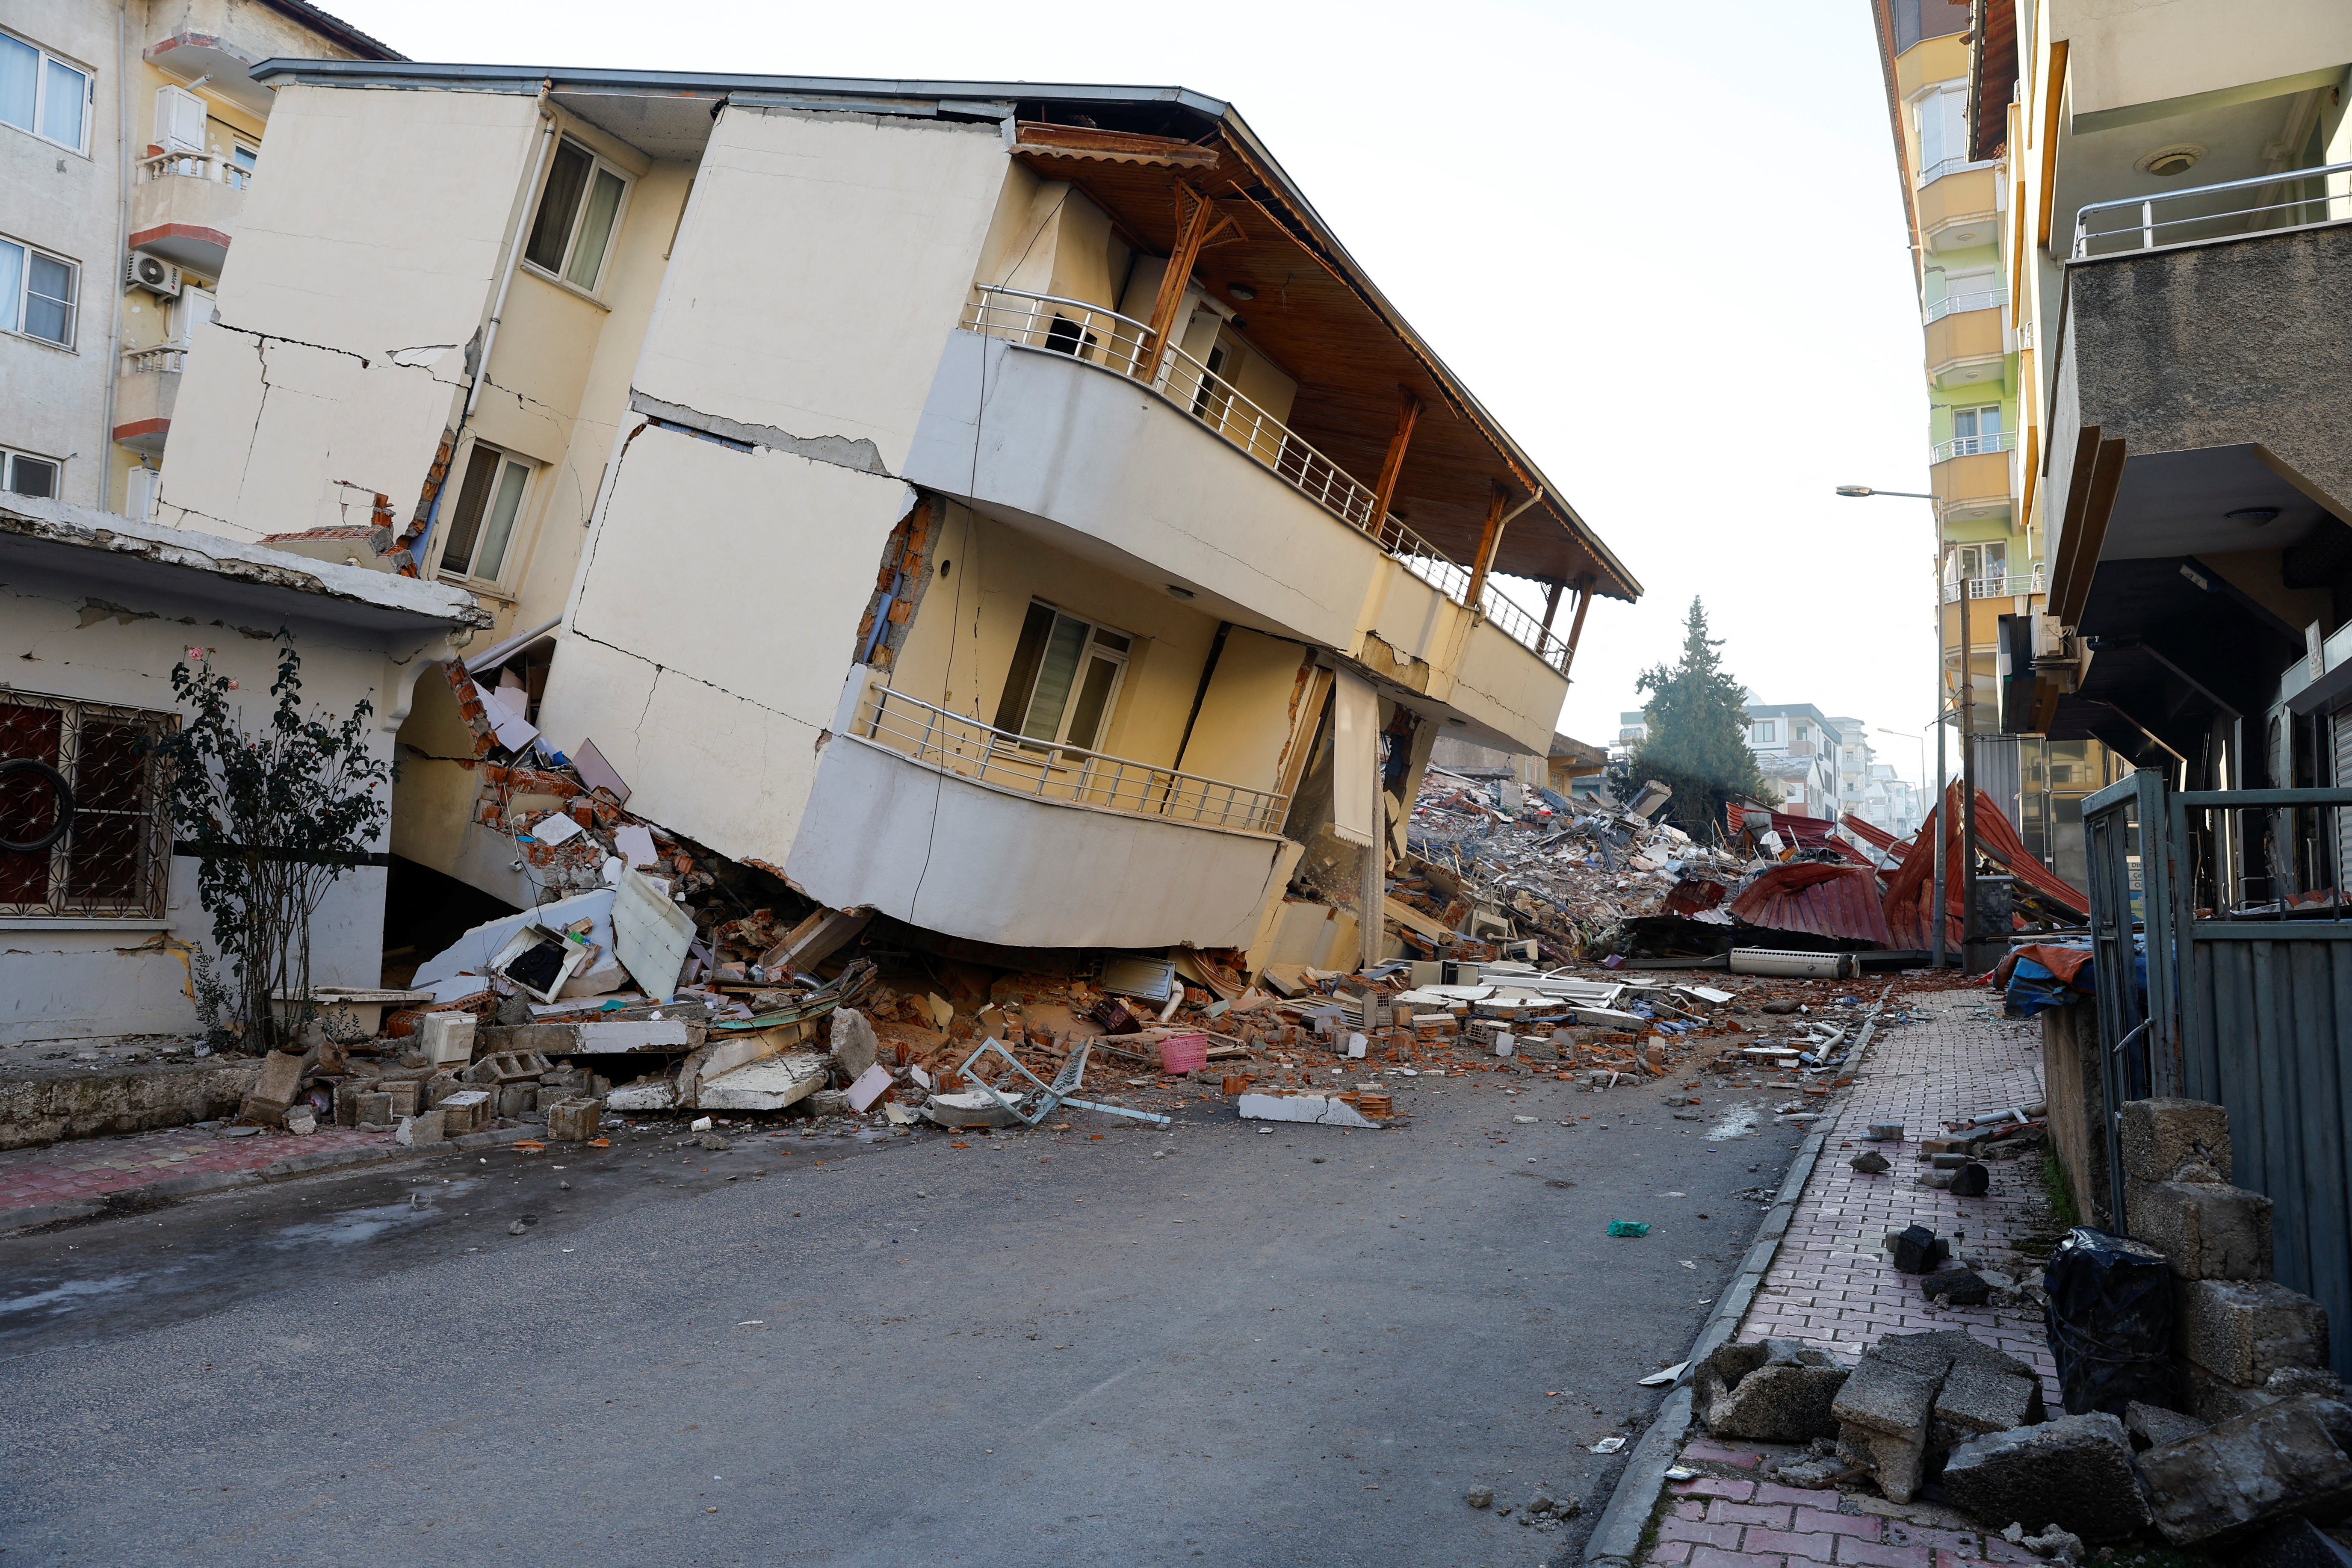 The earthquake could change the political dynamics – but the question is how